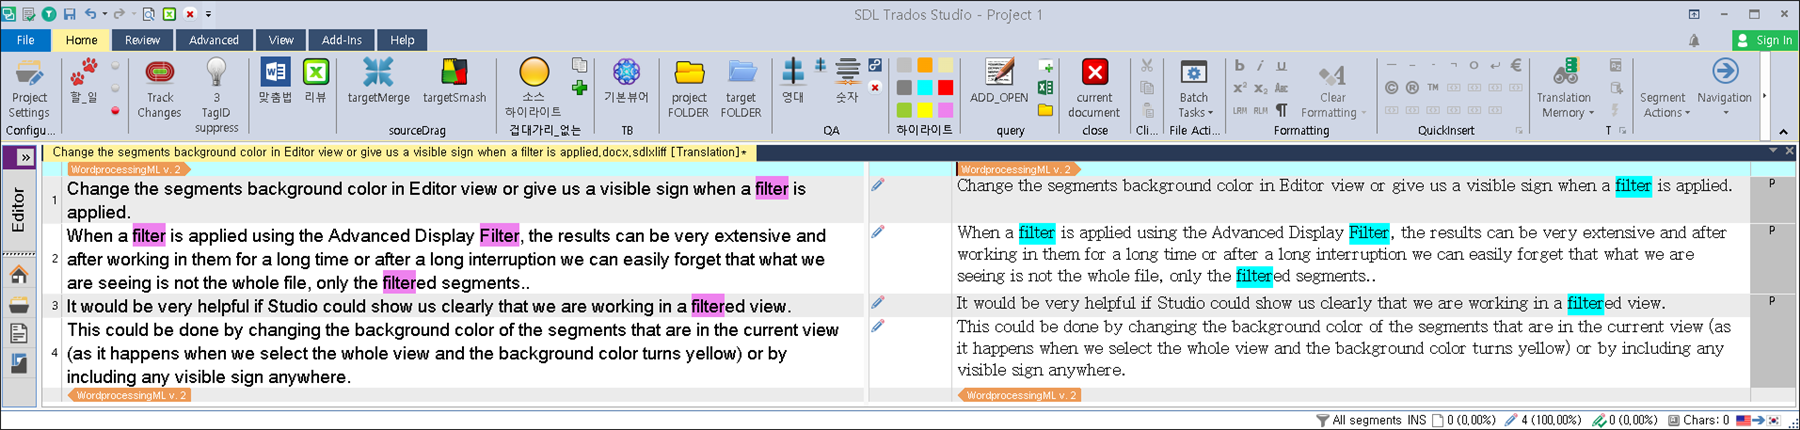 Screenshot of Trados Studio Ideas interface showing a request to change segment background color in Editor view when a filter is applied.